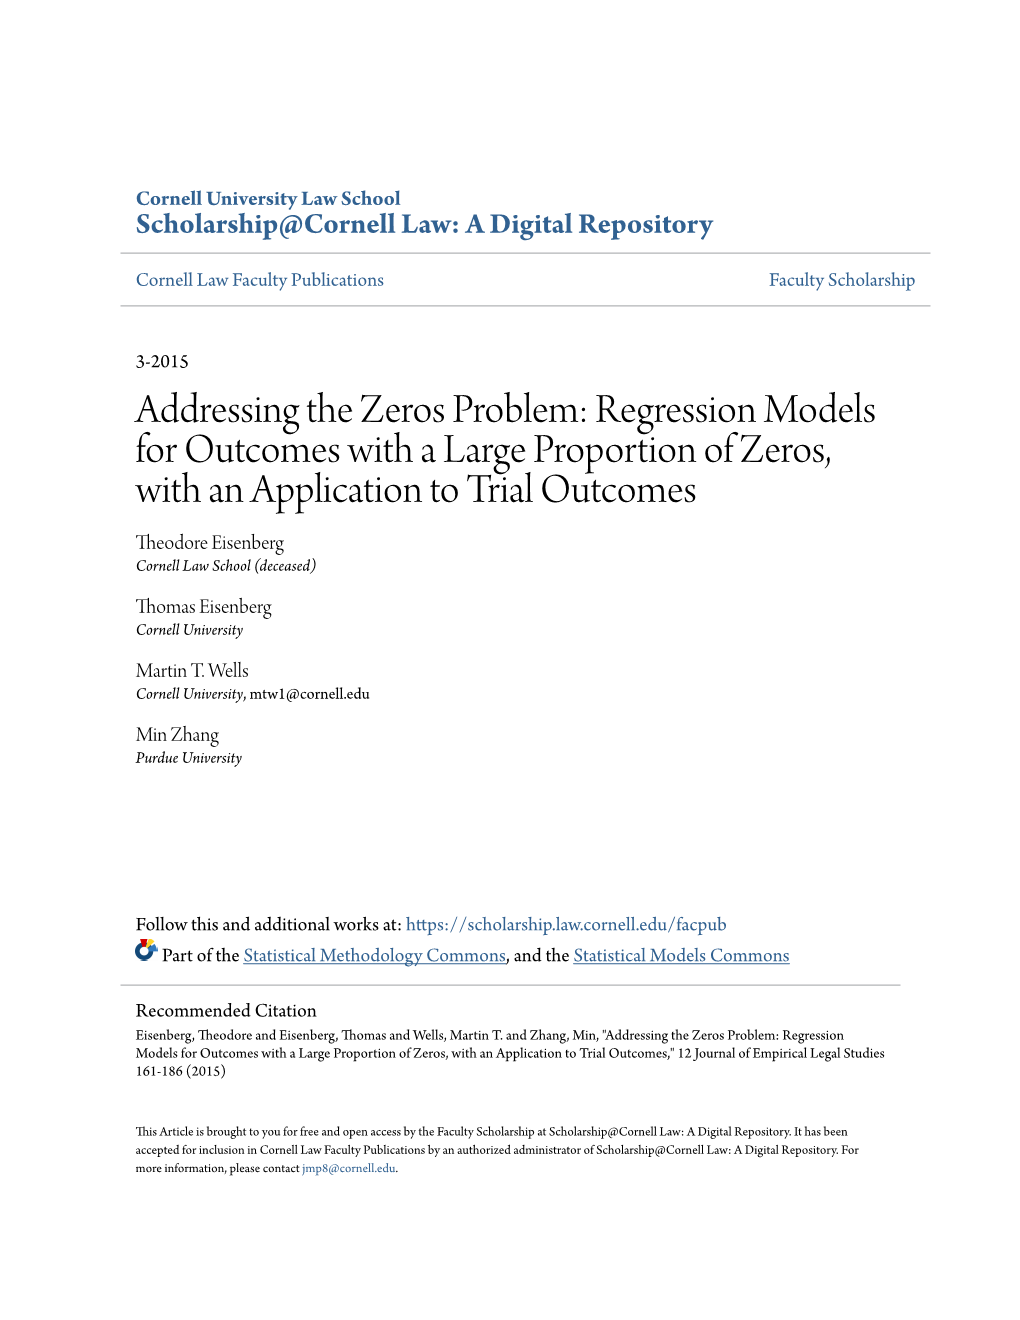 Regression Models for Outcomes with a Large Proportion of Zeros, with an Application to Trial Outcomes Theodore Eisenberg Cornell Law School (Deceased)